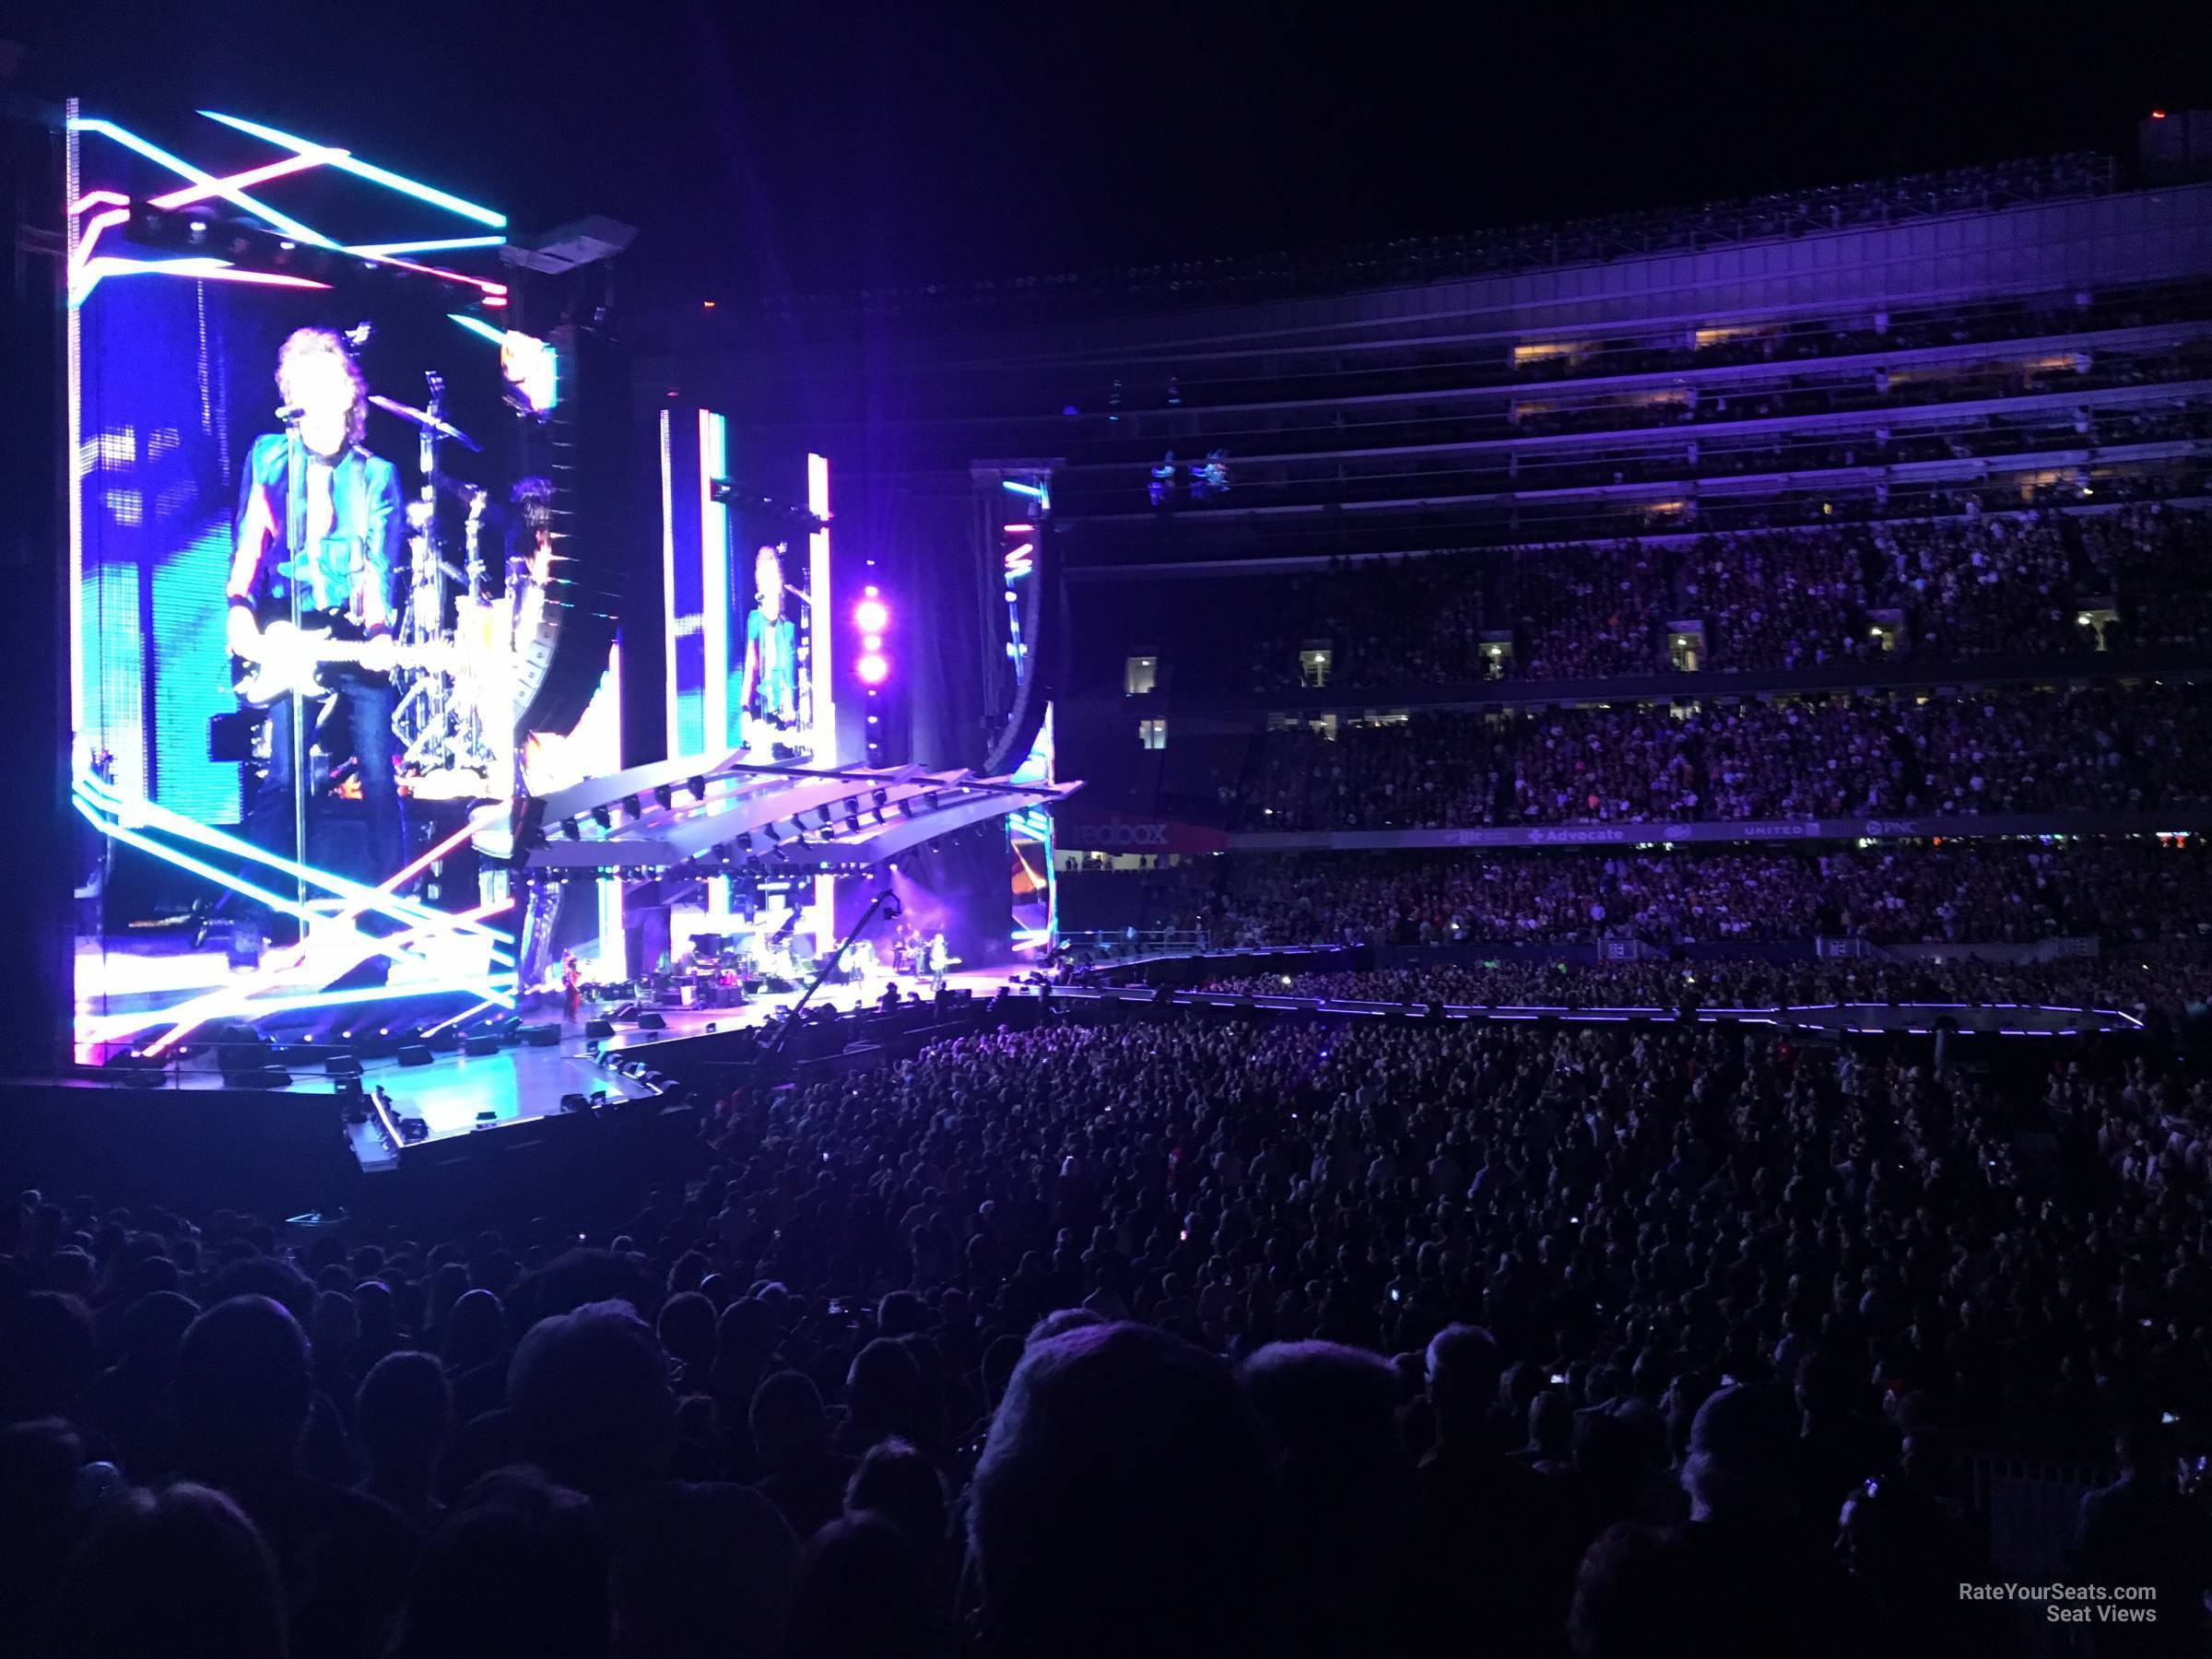 section 140, row 19 seat view  for concert - soldier field